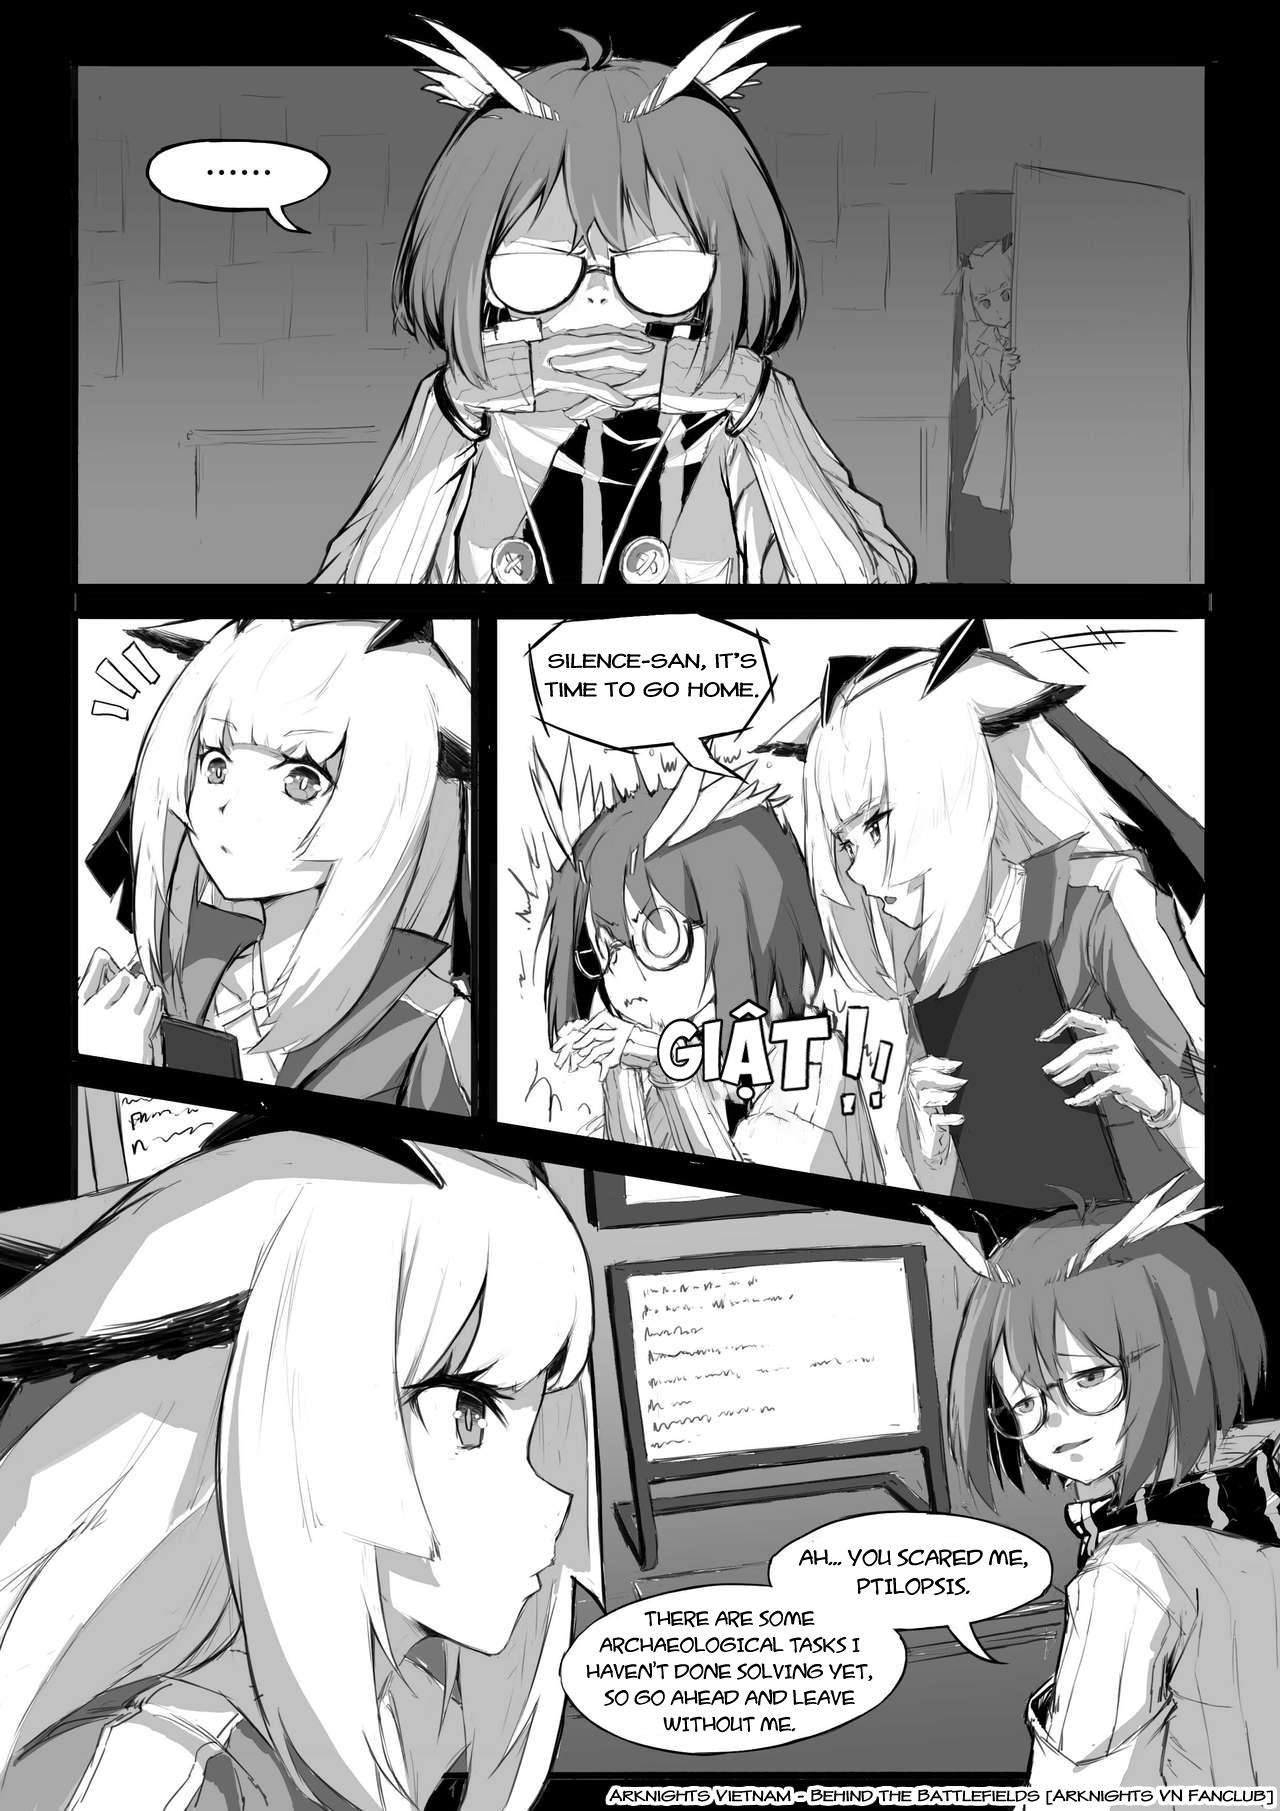 Big Cocks The Story Where Ptilopsis Becomes A Very Little Girl - Arknights Compilation - Page 2